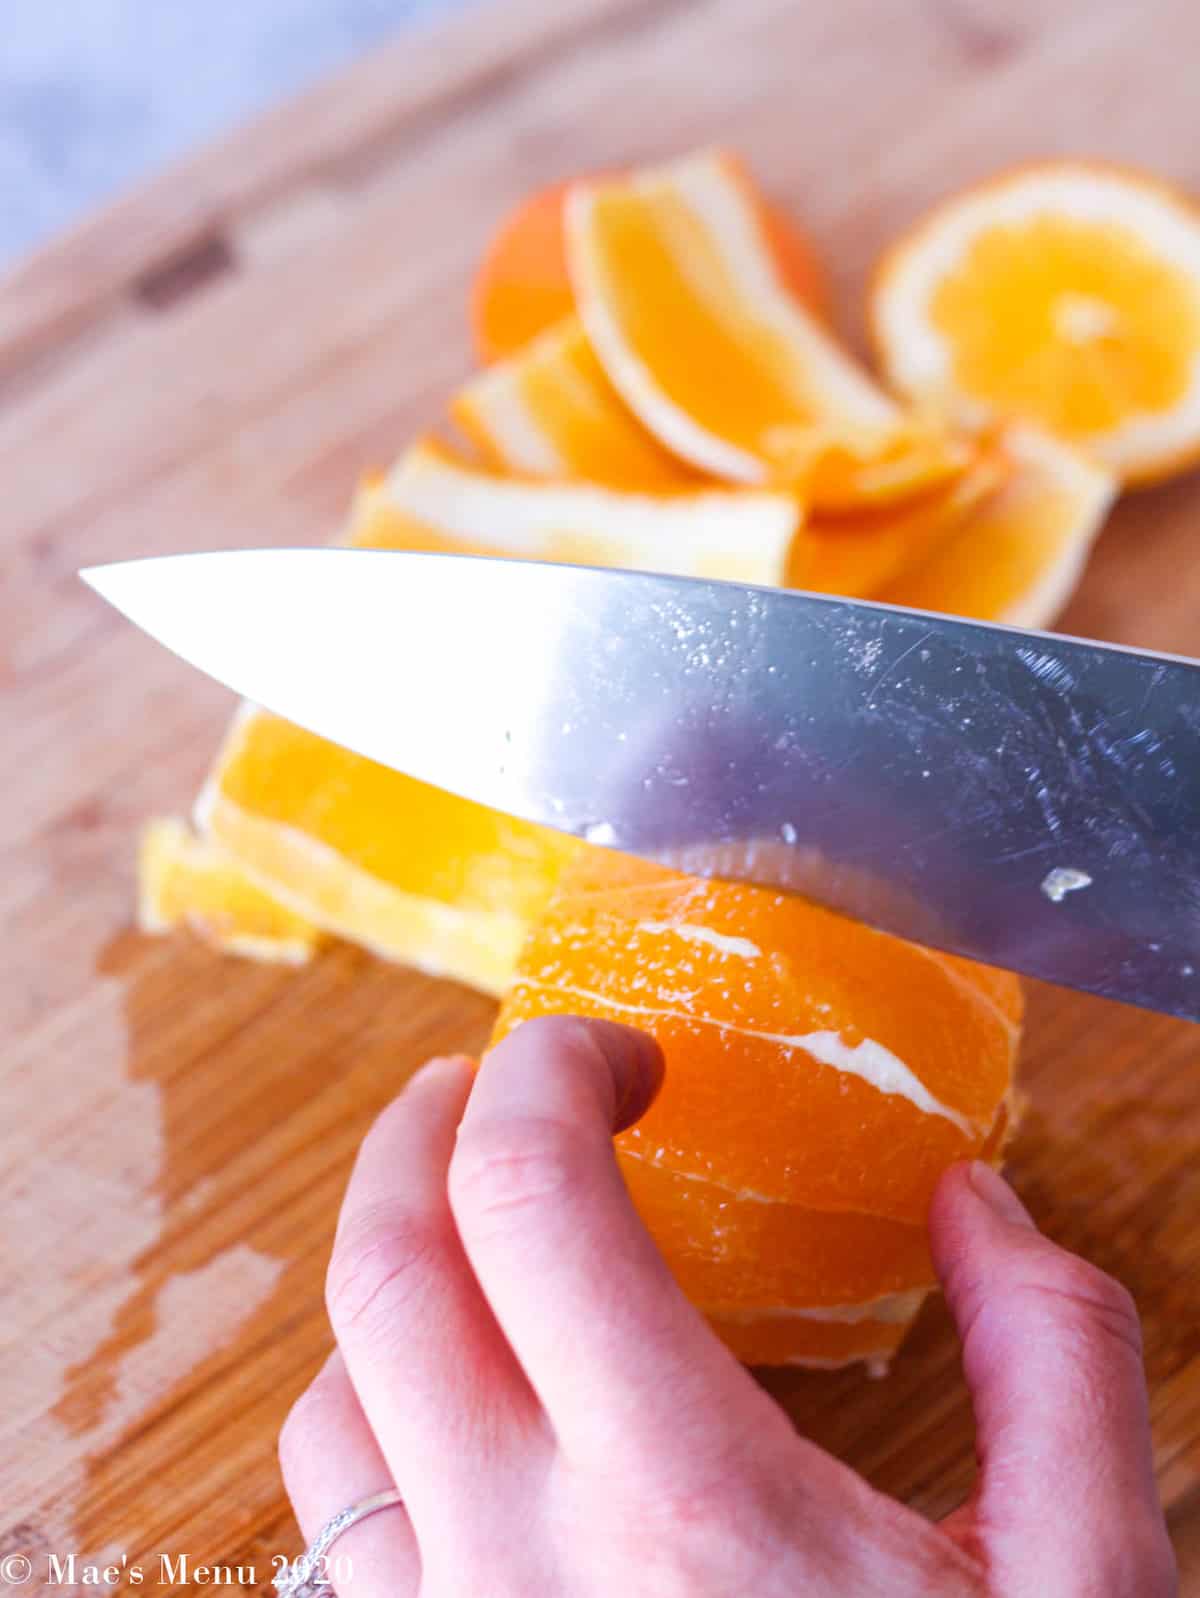 Cutting the segments out of the orange